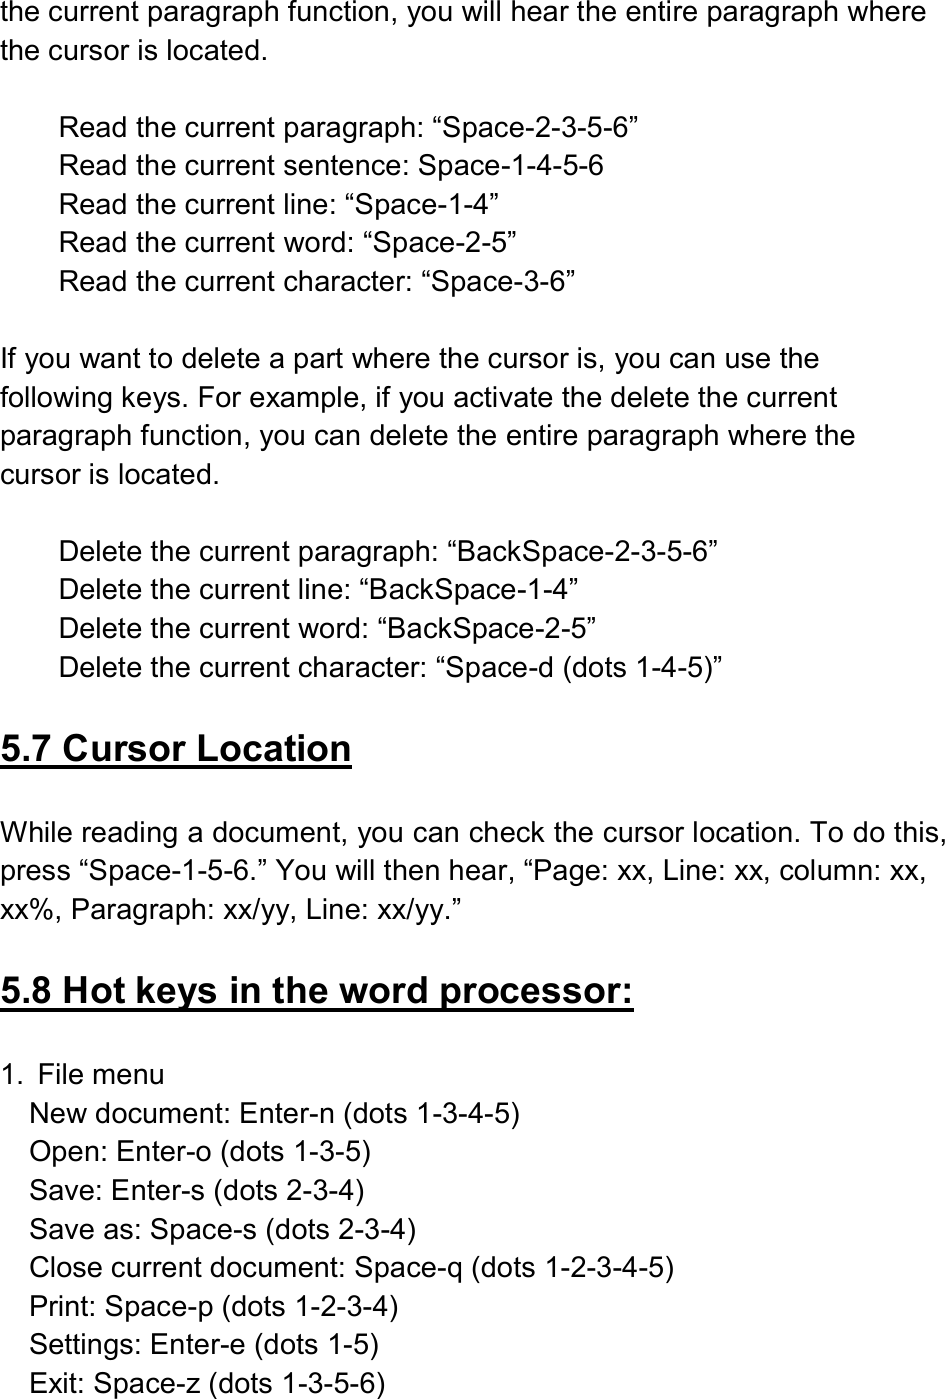  the current paragraph function, you will hear the entire paragraph where the cursor is located.  Read the current paragraph: “Space-2-3-5-6” Read the current sentence: Space-1-4-5-6 Read the current line: “Space-1-4” Read the current word: “Space-2-5” Read the current character: “Space-3-6”  If you want to delete a part where the cursor is, you can use the following keys. For example, if you activate the delete the current paragraph function, you can delete the entire paragraph where the cursor is located.  Delete the current paragraph: “BackSpace-2-3-5-6” Delete the current line: “BackSpace-1-4” Delete the current word: “BackSpace-2-5” Delete the current character: “Space-d (dots 1-4-5)”  5.7 Cursor Location  While reading a document, you can check the cursor location. To do this, press “Space-1-5-6.” You will then hear, “Page: xx, Line: xx, column: xx, xx%, Paragraph: xx/yy, Line: xx/yy.”  5.8 Hot keys in the word processor:  1.  File menu New document: Enter-n (dots 1-3-4-5) Open: Enter-o (dots 1-3-5) Save: Enter-s (dots 2-3-4)   Save as: Space-s (dots 2-3-4) Close current document: Space-q (dots 1-2-3-4-5) Print: Space-p (dots 1-2-3-4)   Settings: Enter-e (dots 1-5)   Exit: Space-z (dots 1-3-5-6) 